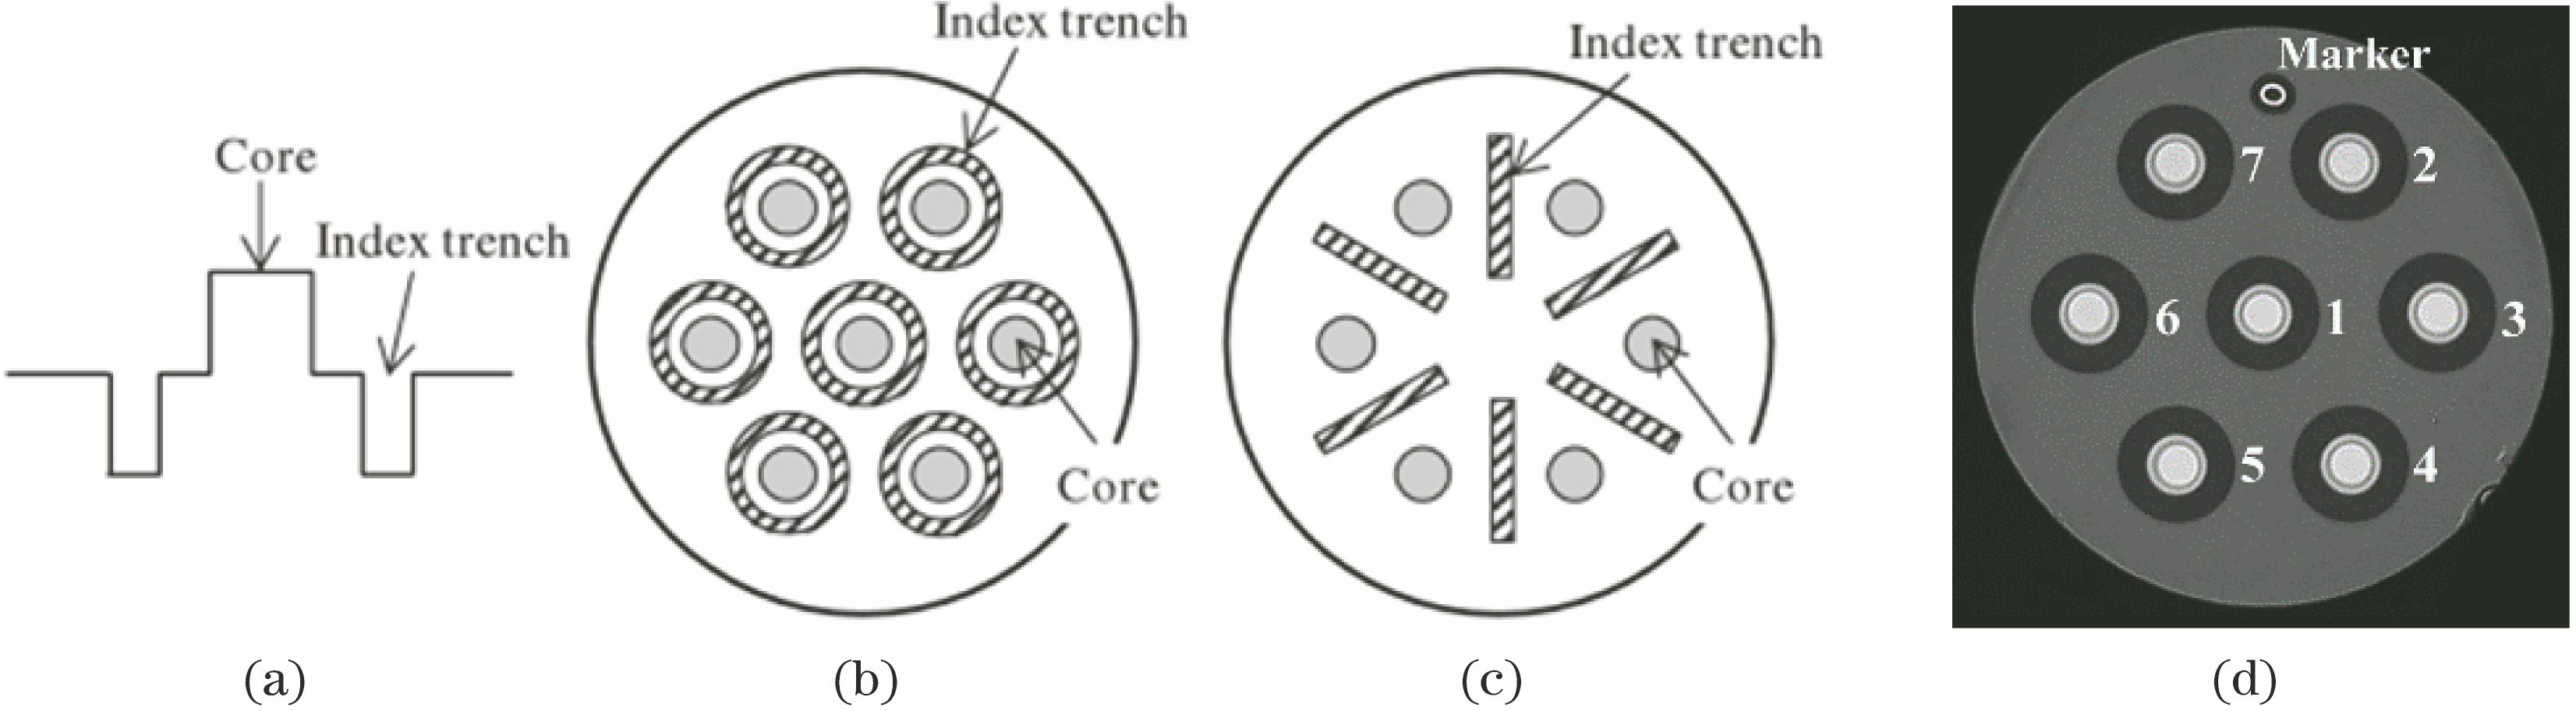 Schematic of fiber prepared by suppressing inter-core crosstalk using groove refractive index profile[50-53]. (a) Refractive index distribution of single core of multi-core fiber encircled by low refractive index; (b) schematic of cross-section structure of 7-core fiber with core refractive index showed in Fig. 2(a); (c) schematic of cross-section structure of 6-core fiber isolated by groove wall with low refractive index; (d) micrograph of cross section of ultra-low crosstalk 7-core fiber corre